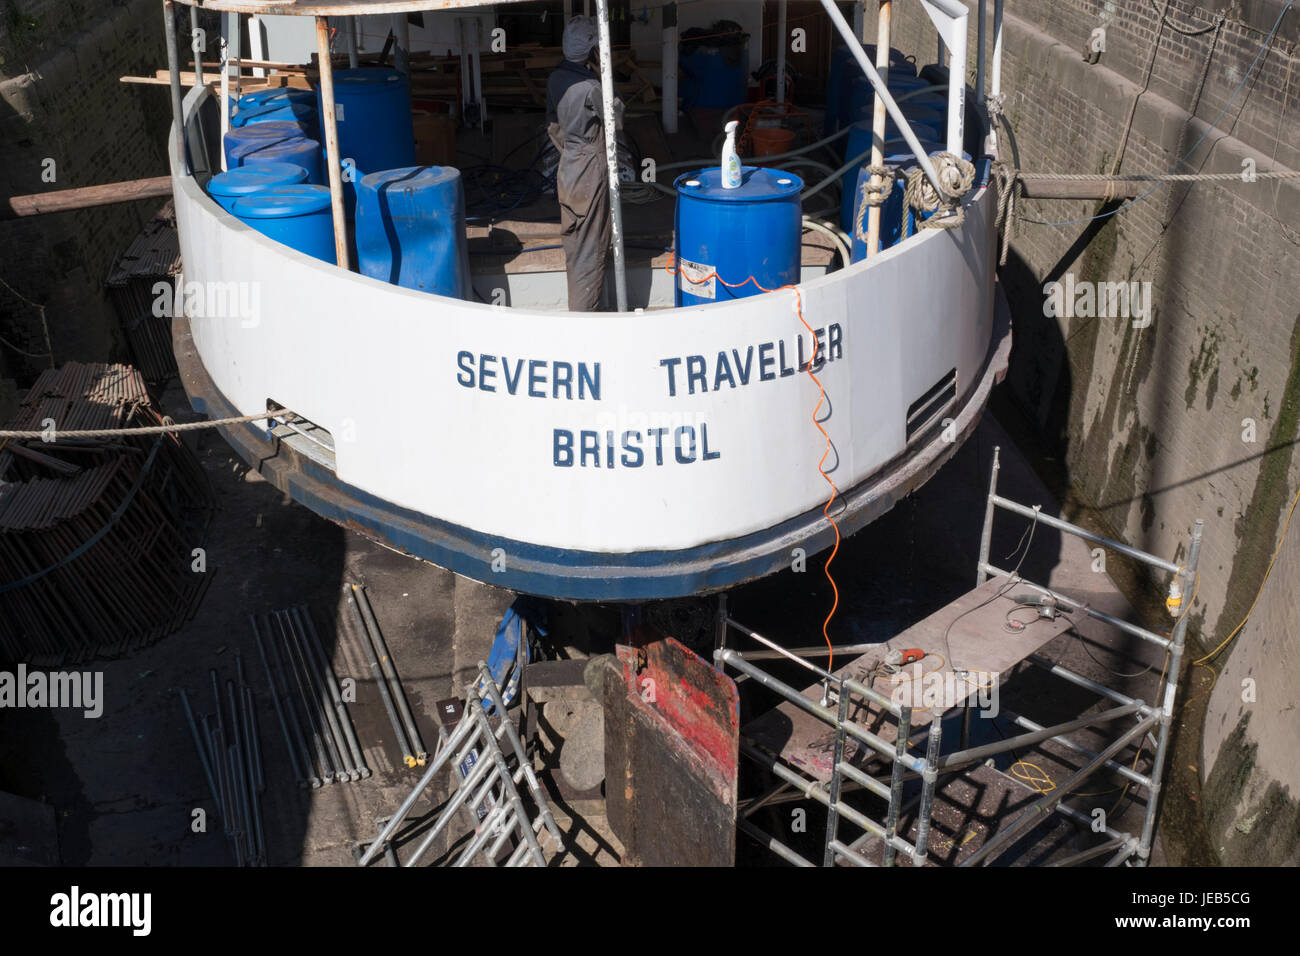 Tourist trip boat Severn Traveller in drydock at Gloucester for maintenance and repairs Stock Photo